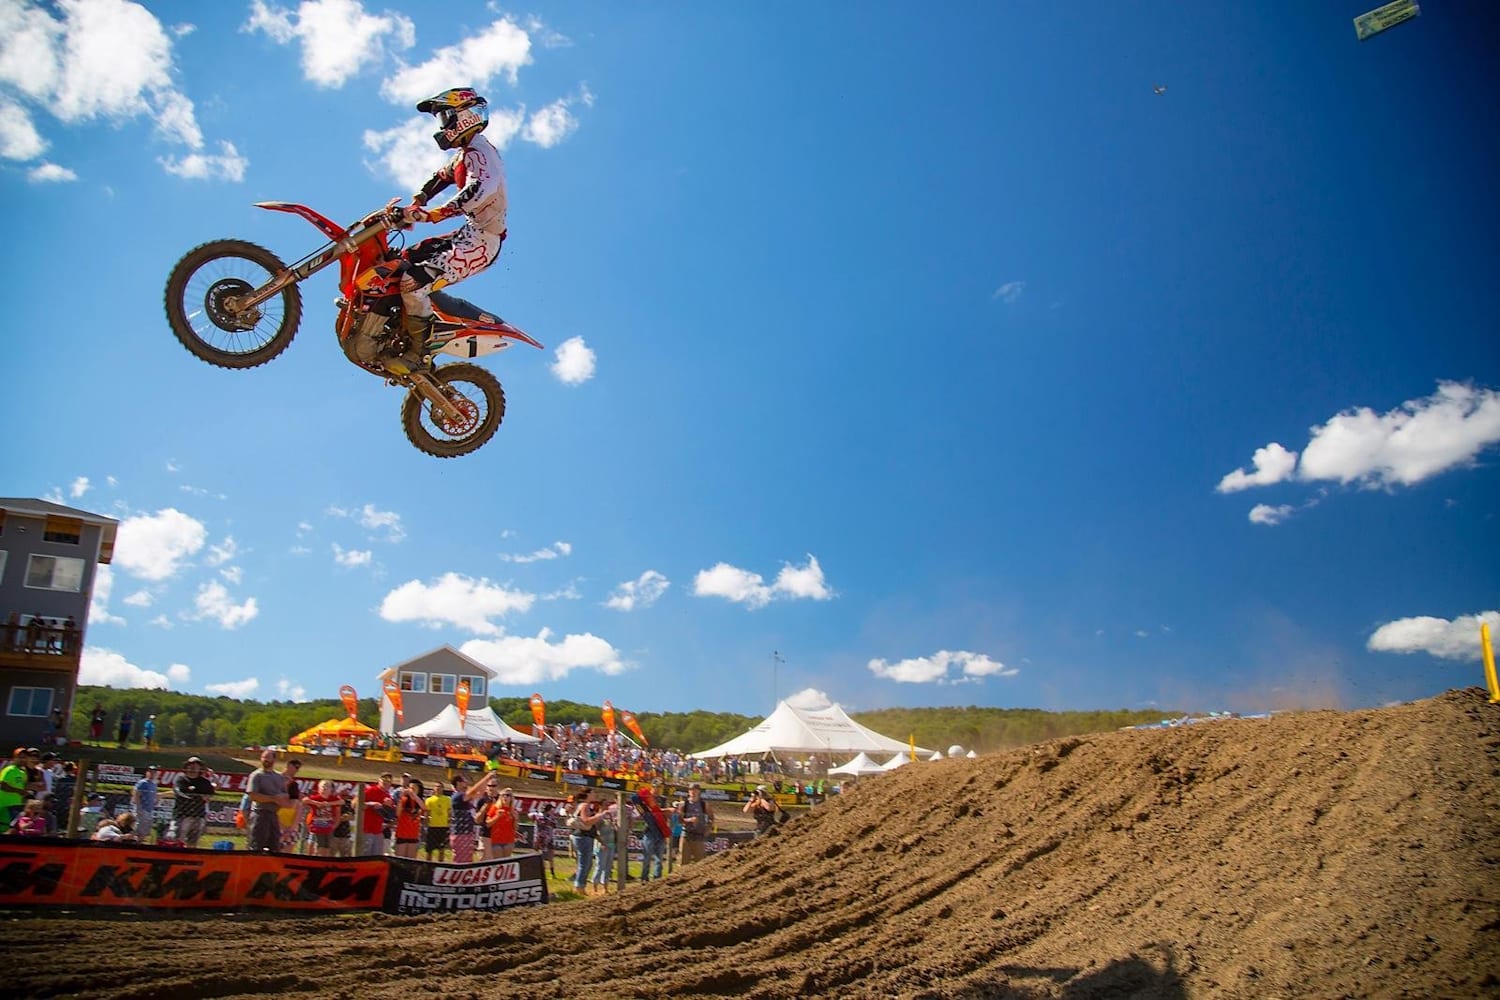 10 Best Photos from the 2013 Unadilla MX National